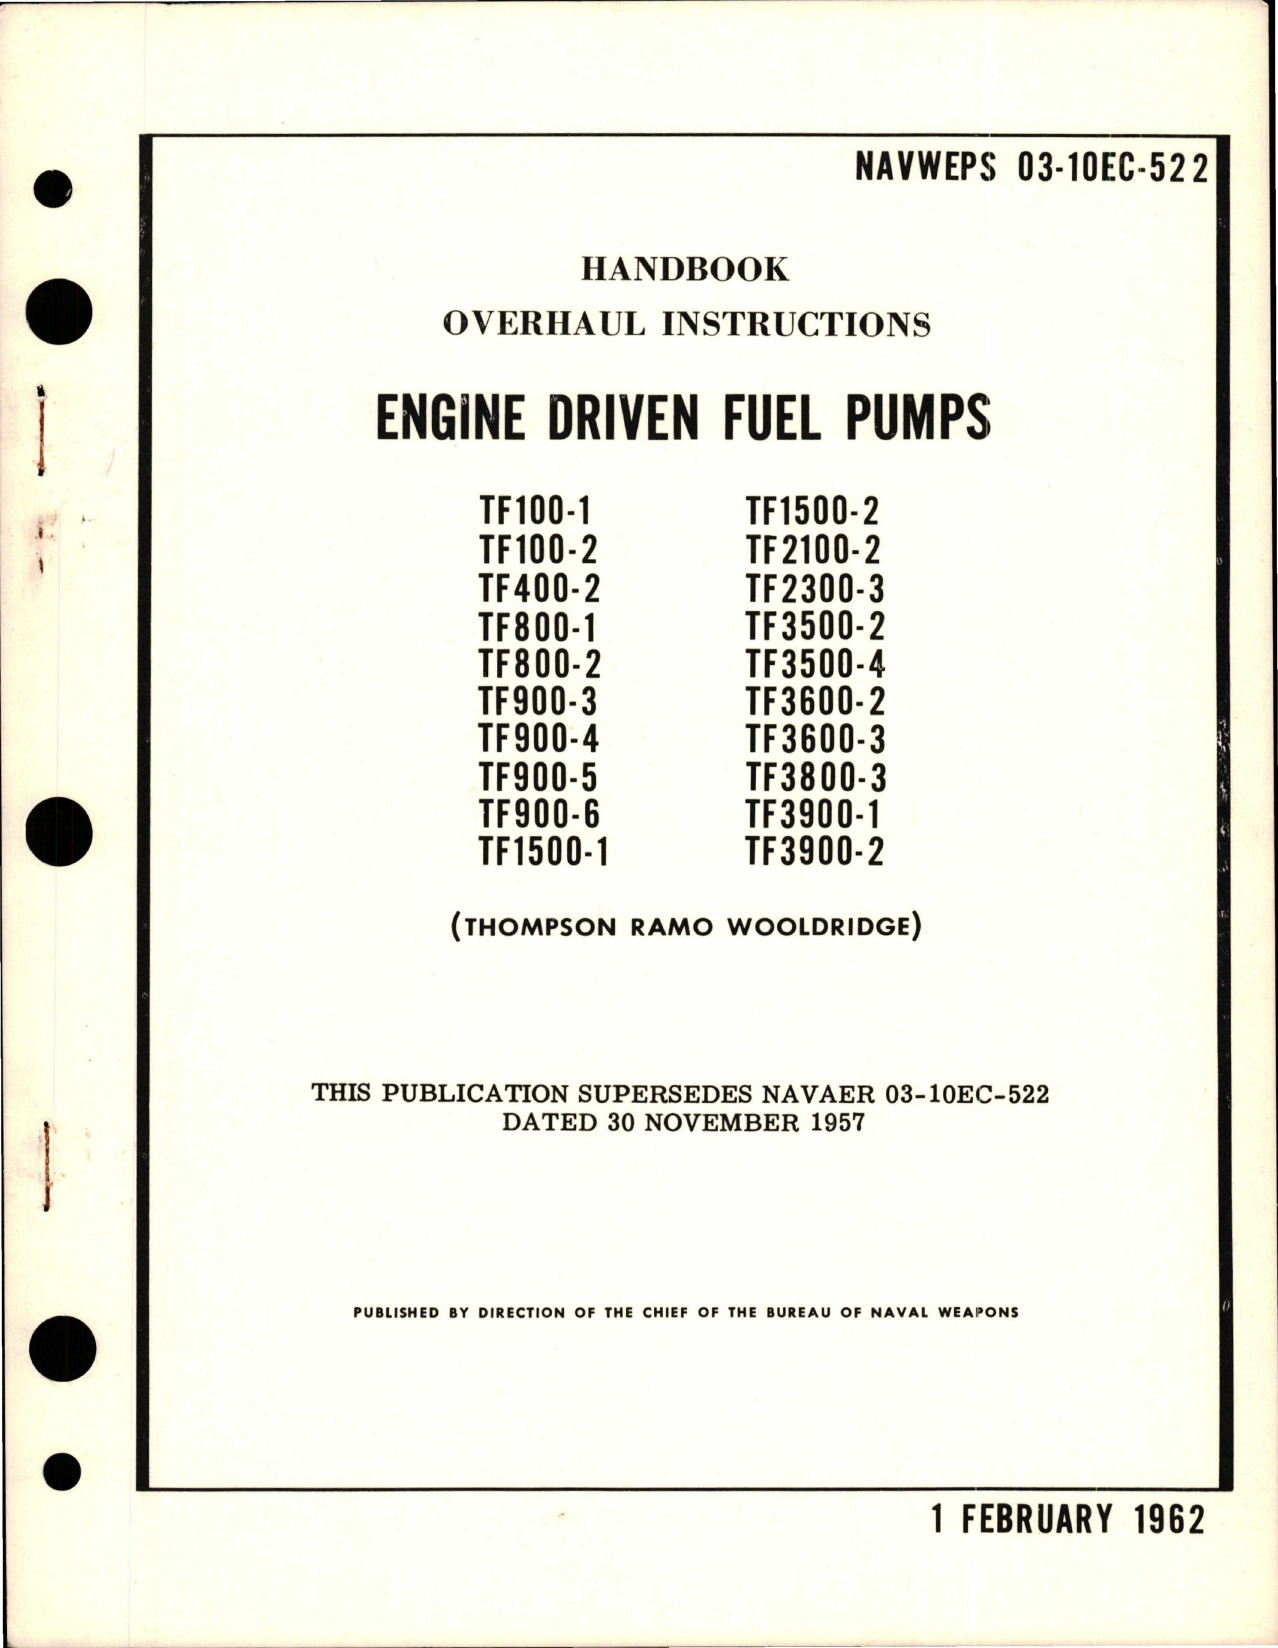 Sample page 1 from AirCorps Library document: Overhaul Instructions for Engine Driven Fuel Pumps